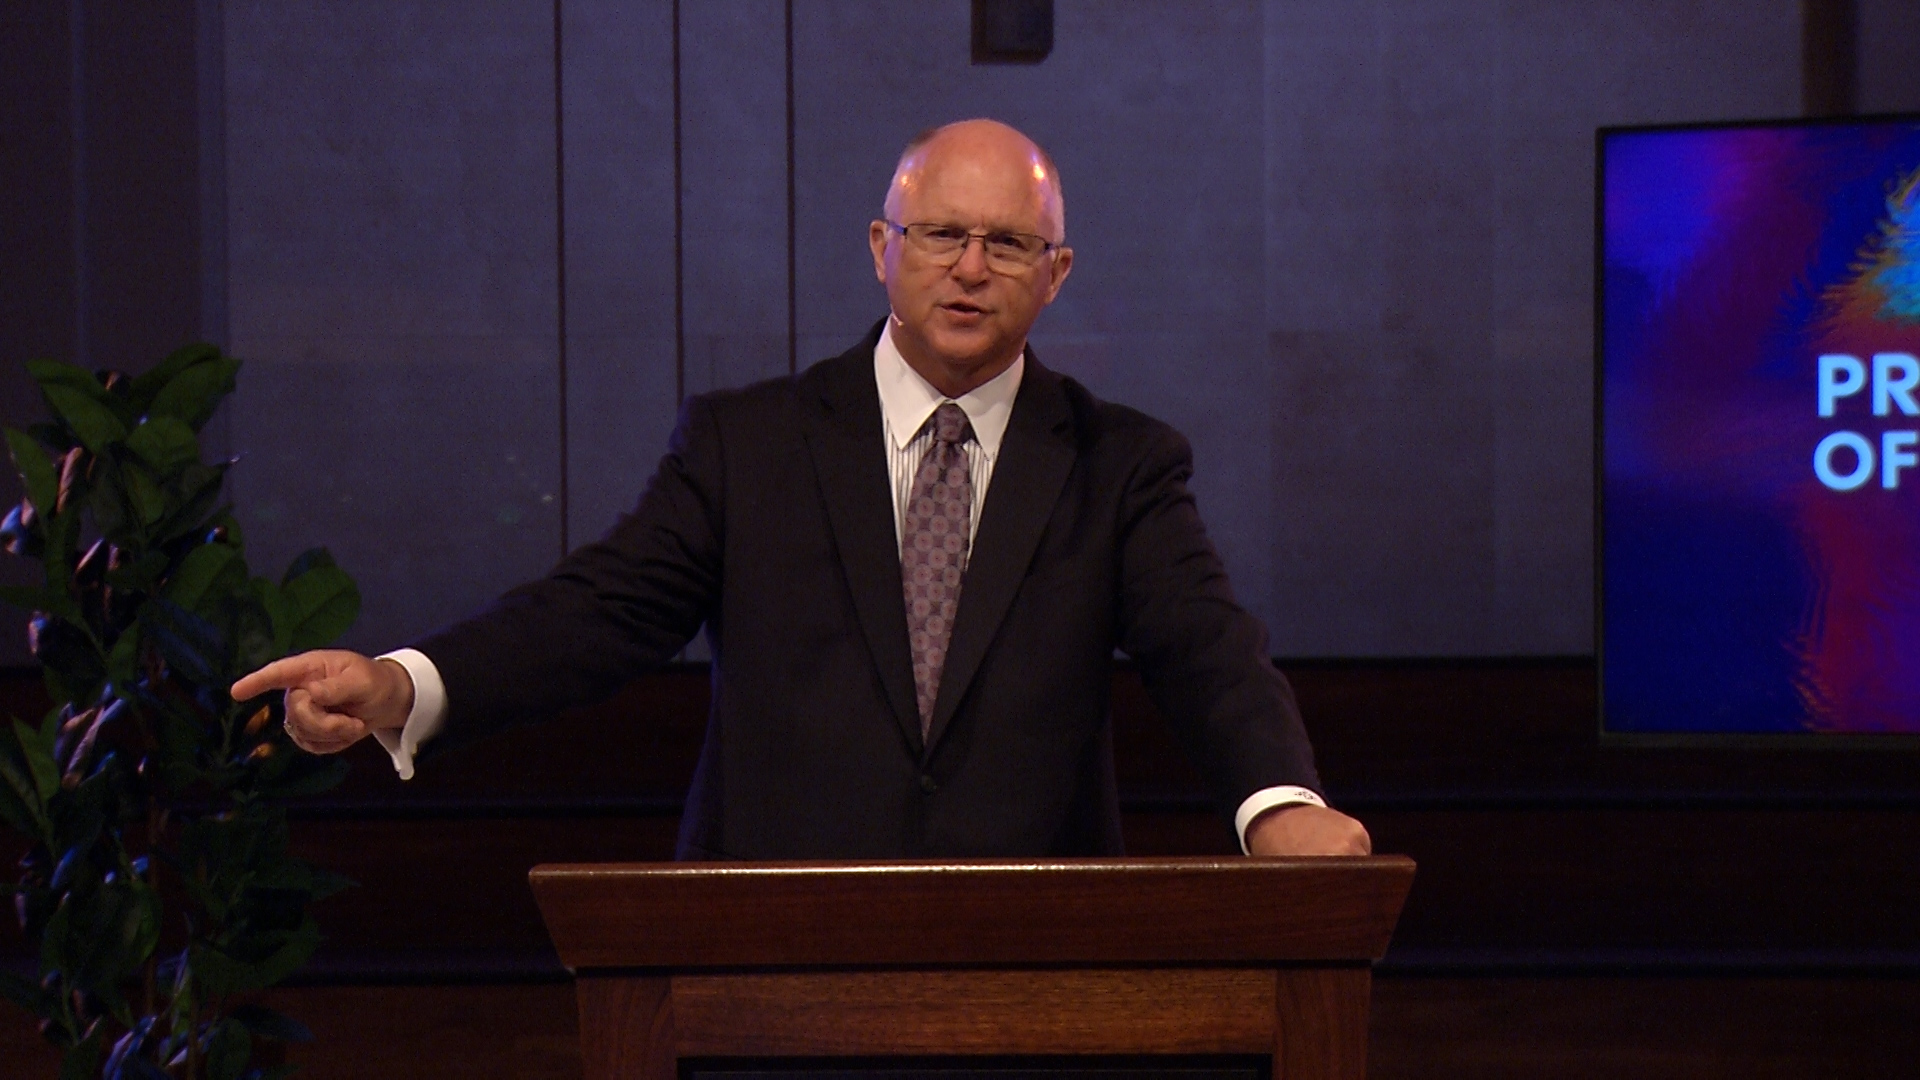 Pastor Paul Chappell: Only Jesus Can Deliver